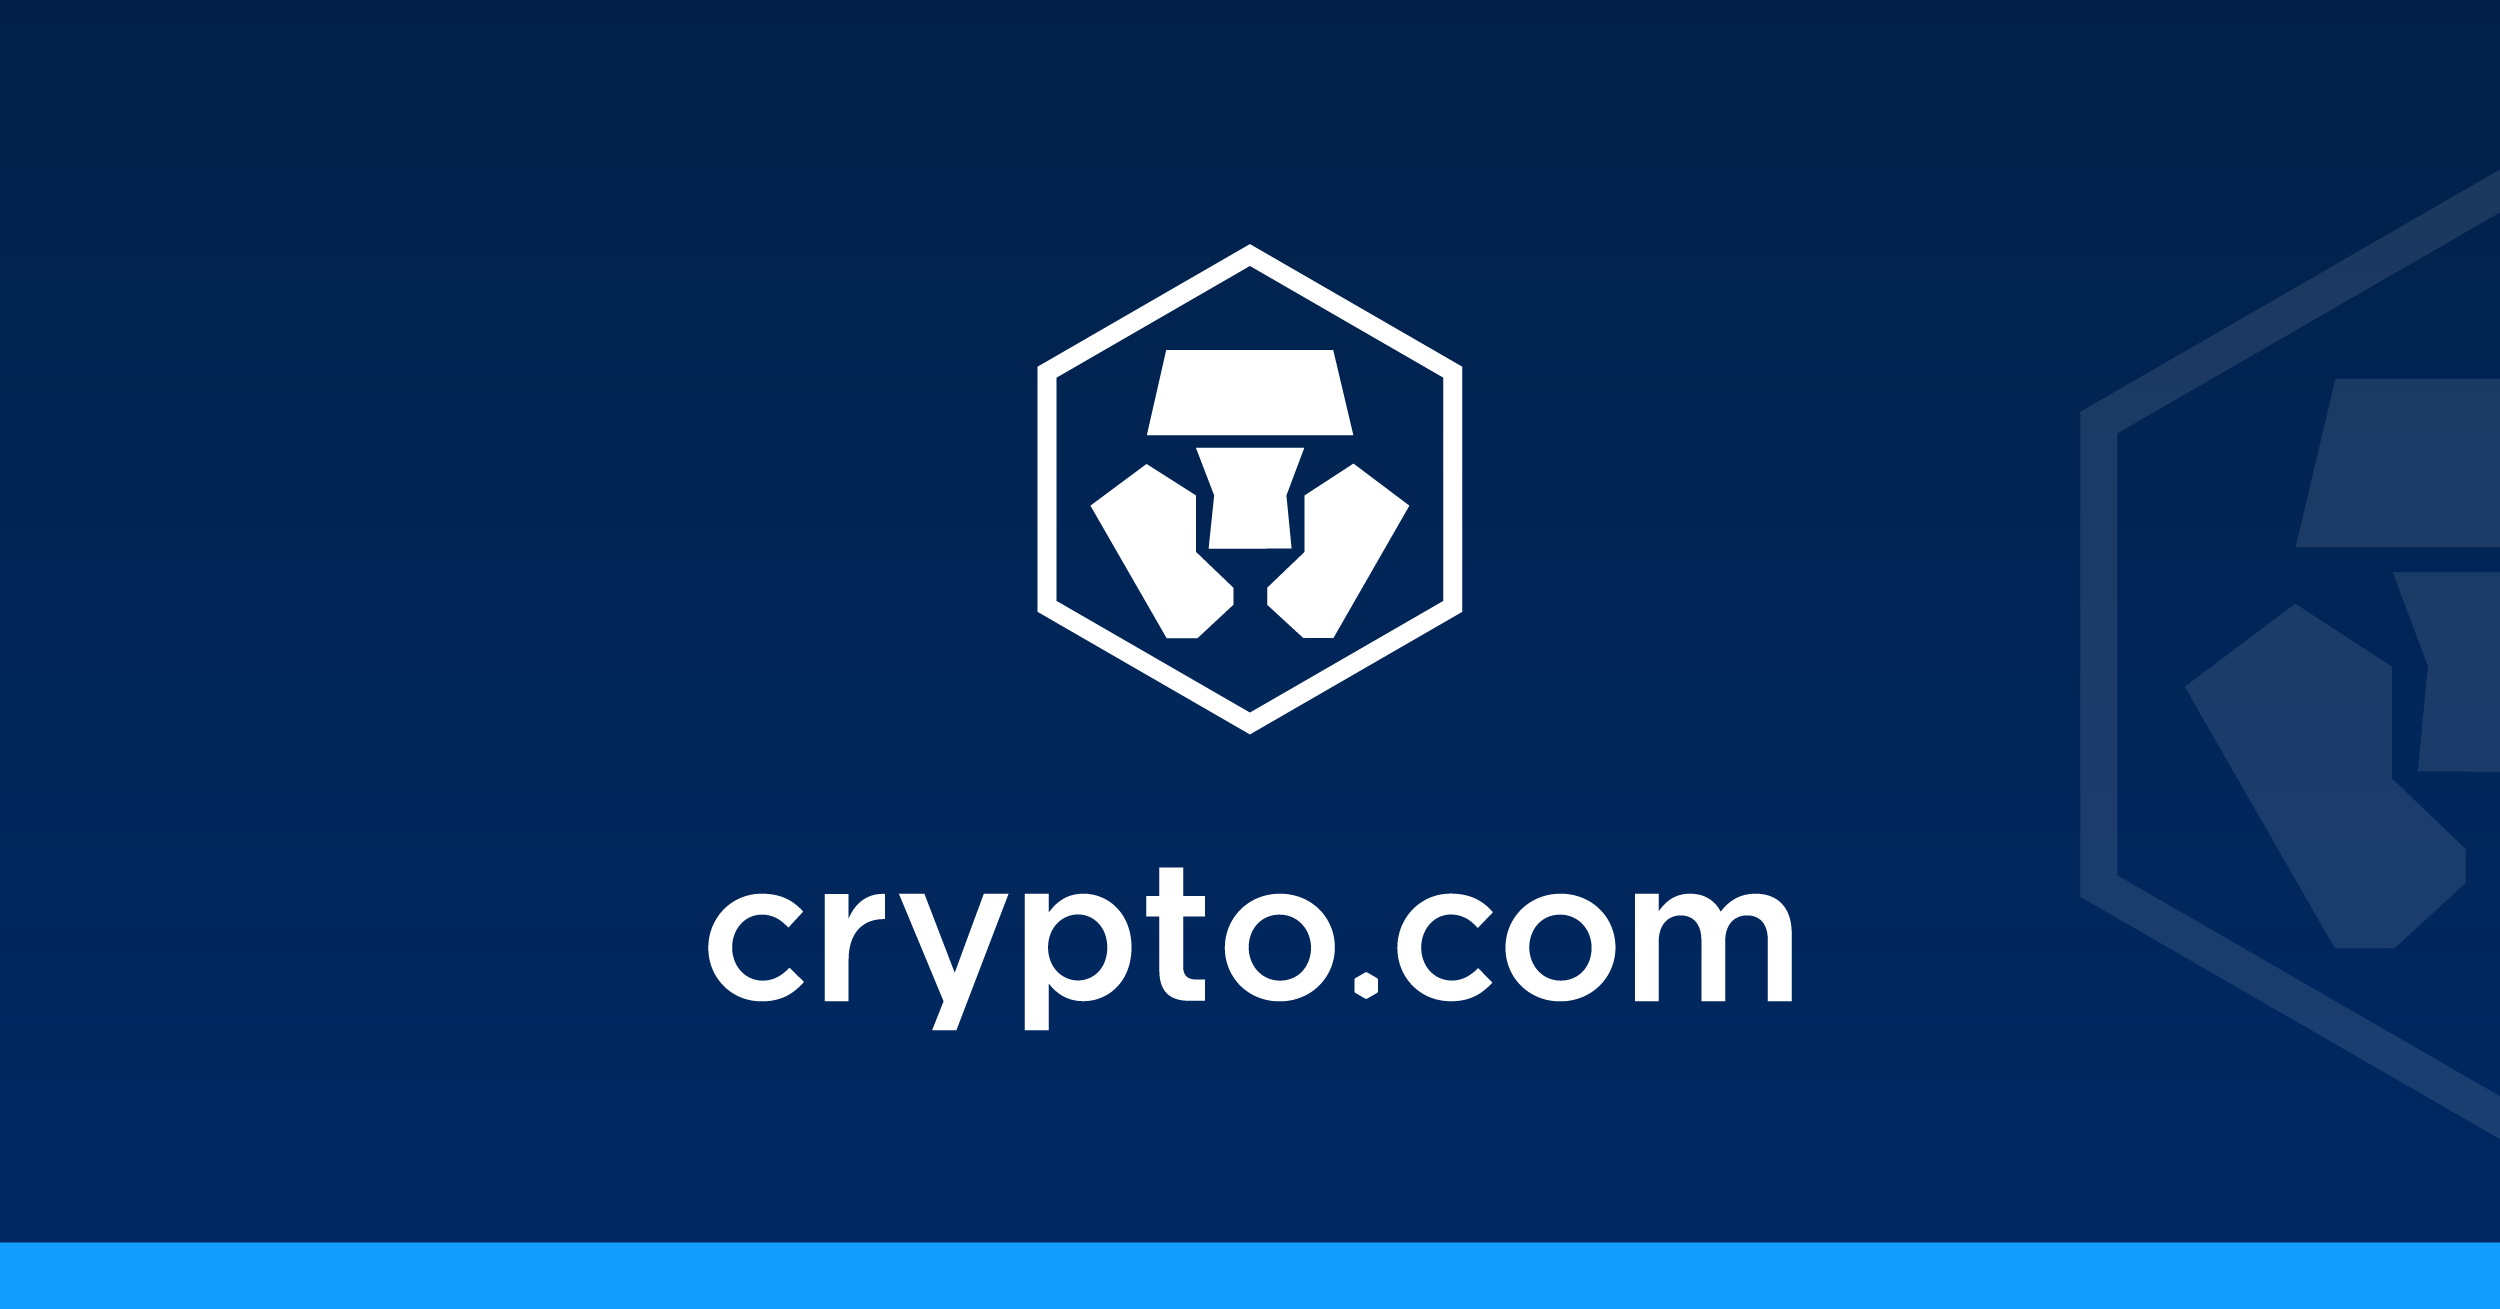 Crypto.com: The best place to buy Bitcoin, Ethereum, and 250+ altcoins